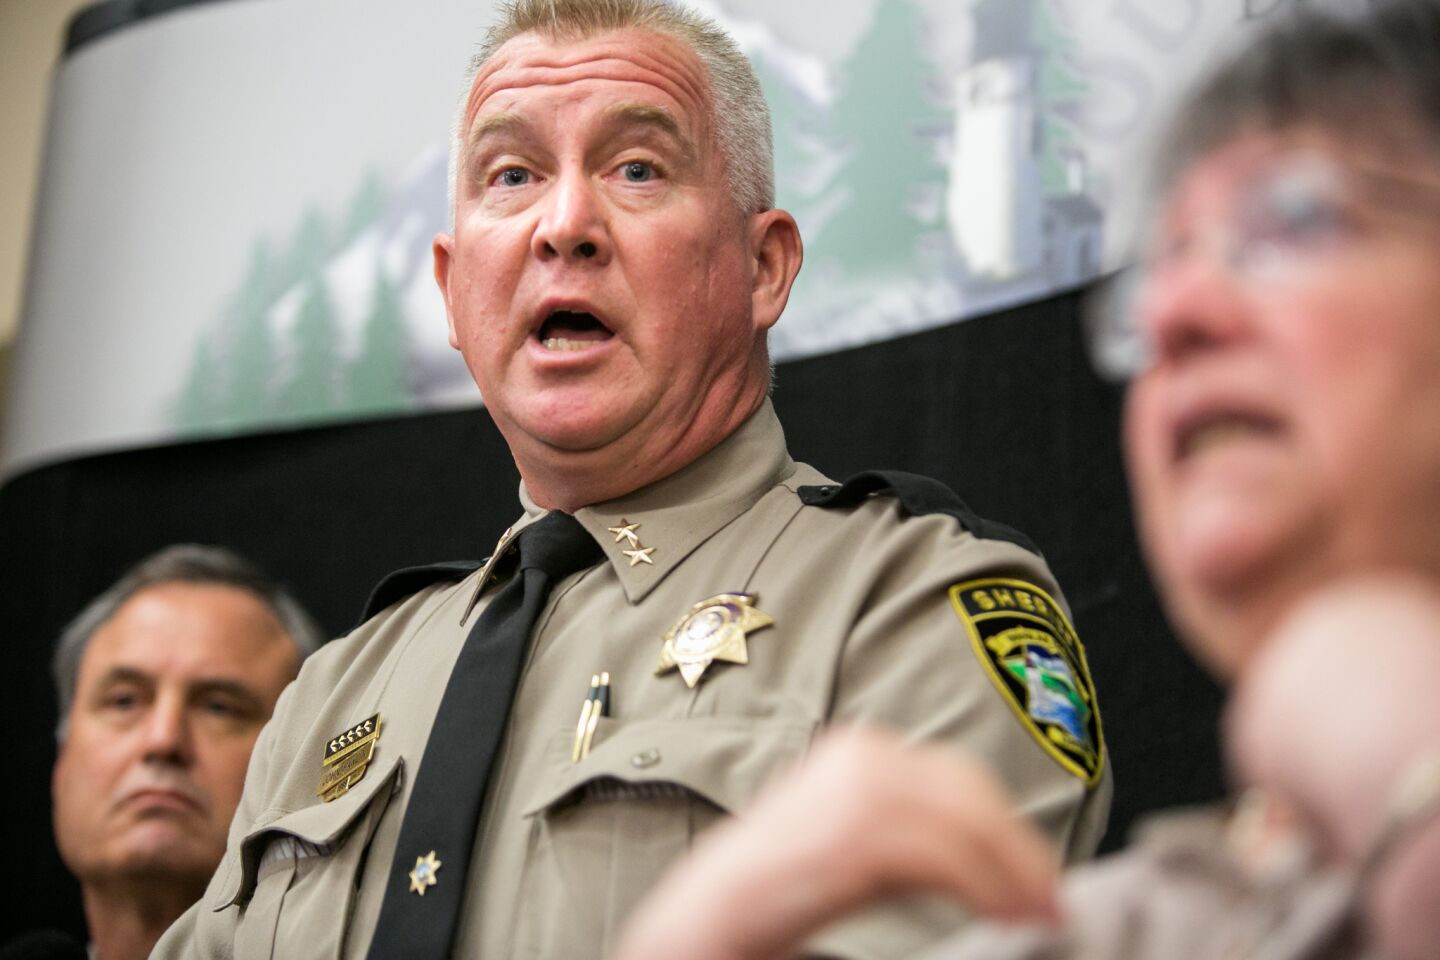 Douglas County Sheriff John Hanlin answers questions on the shooting at a press conference in Roseburg, Ore.